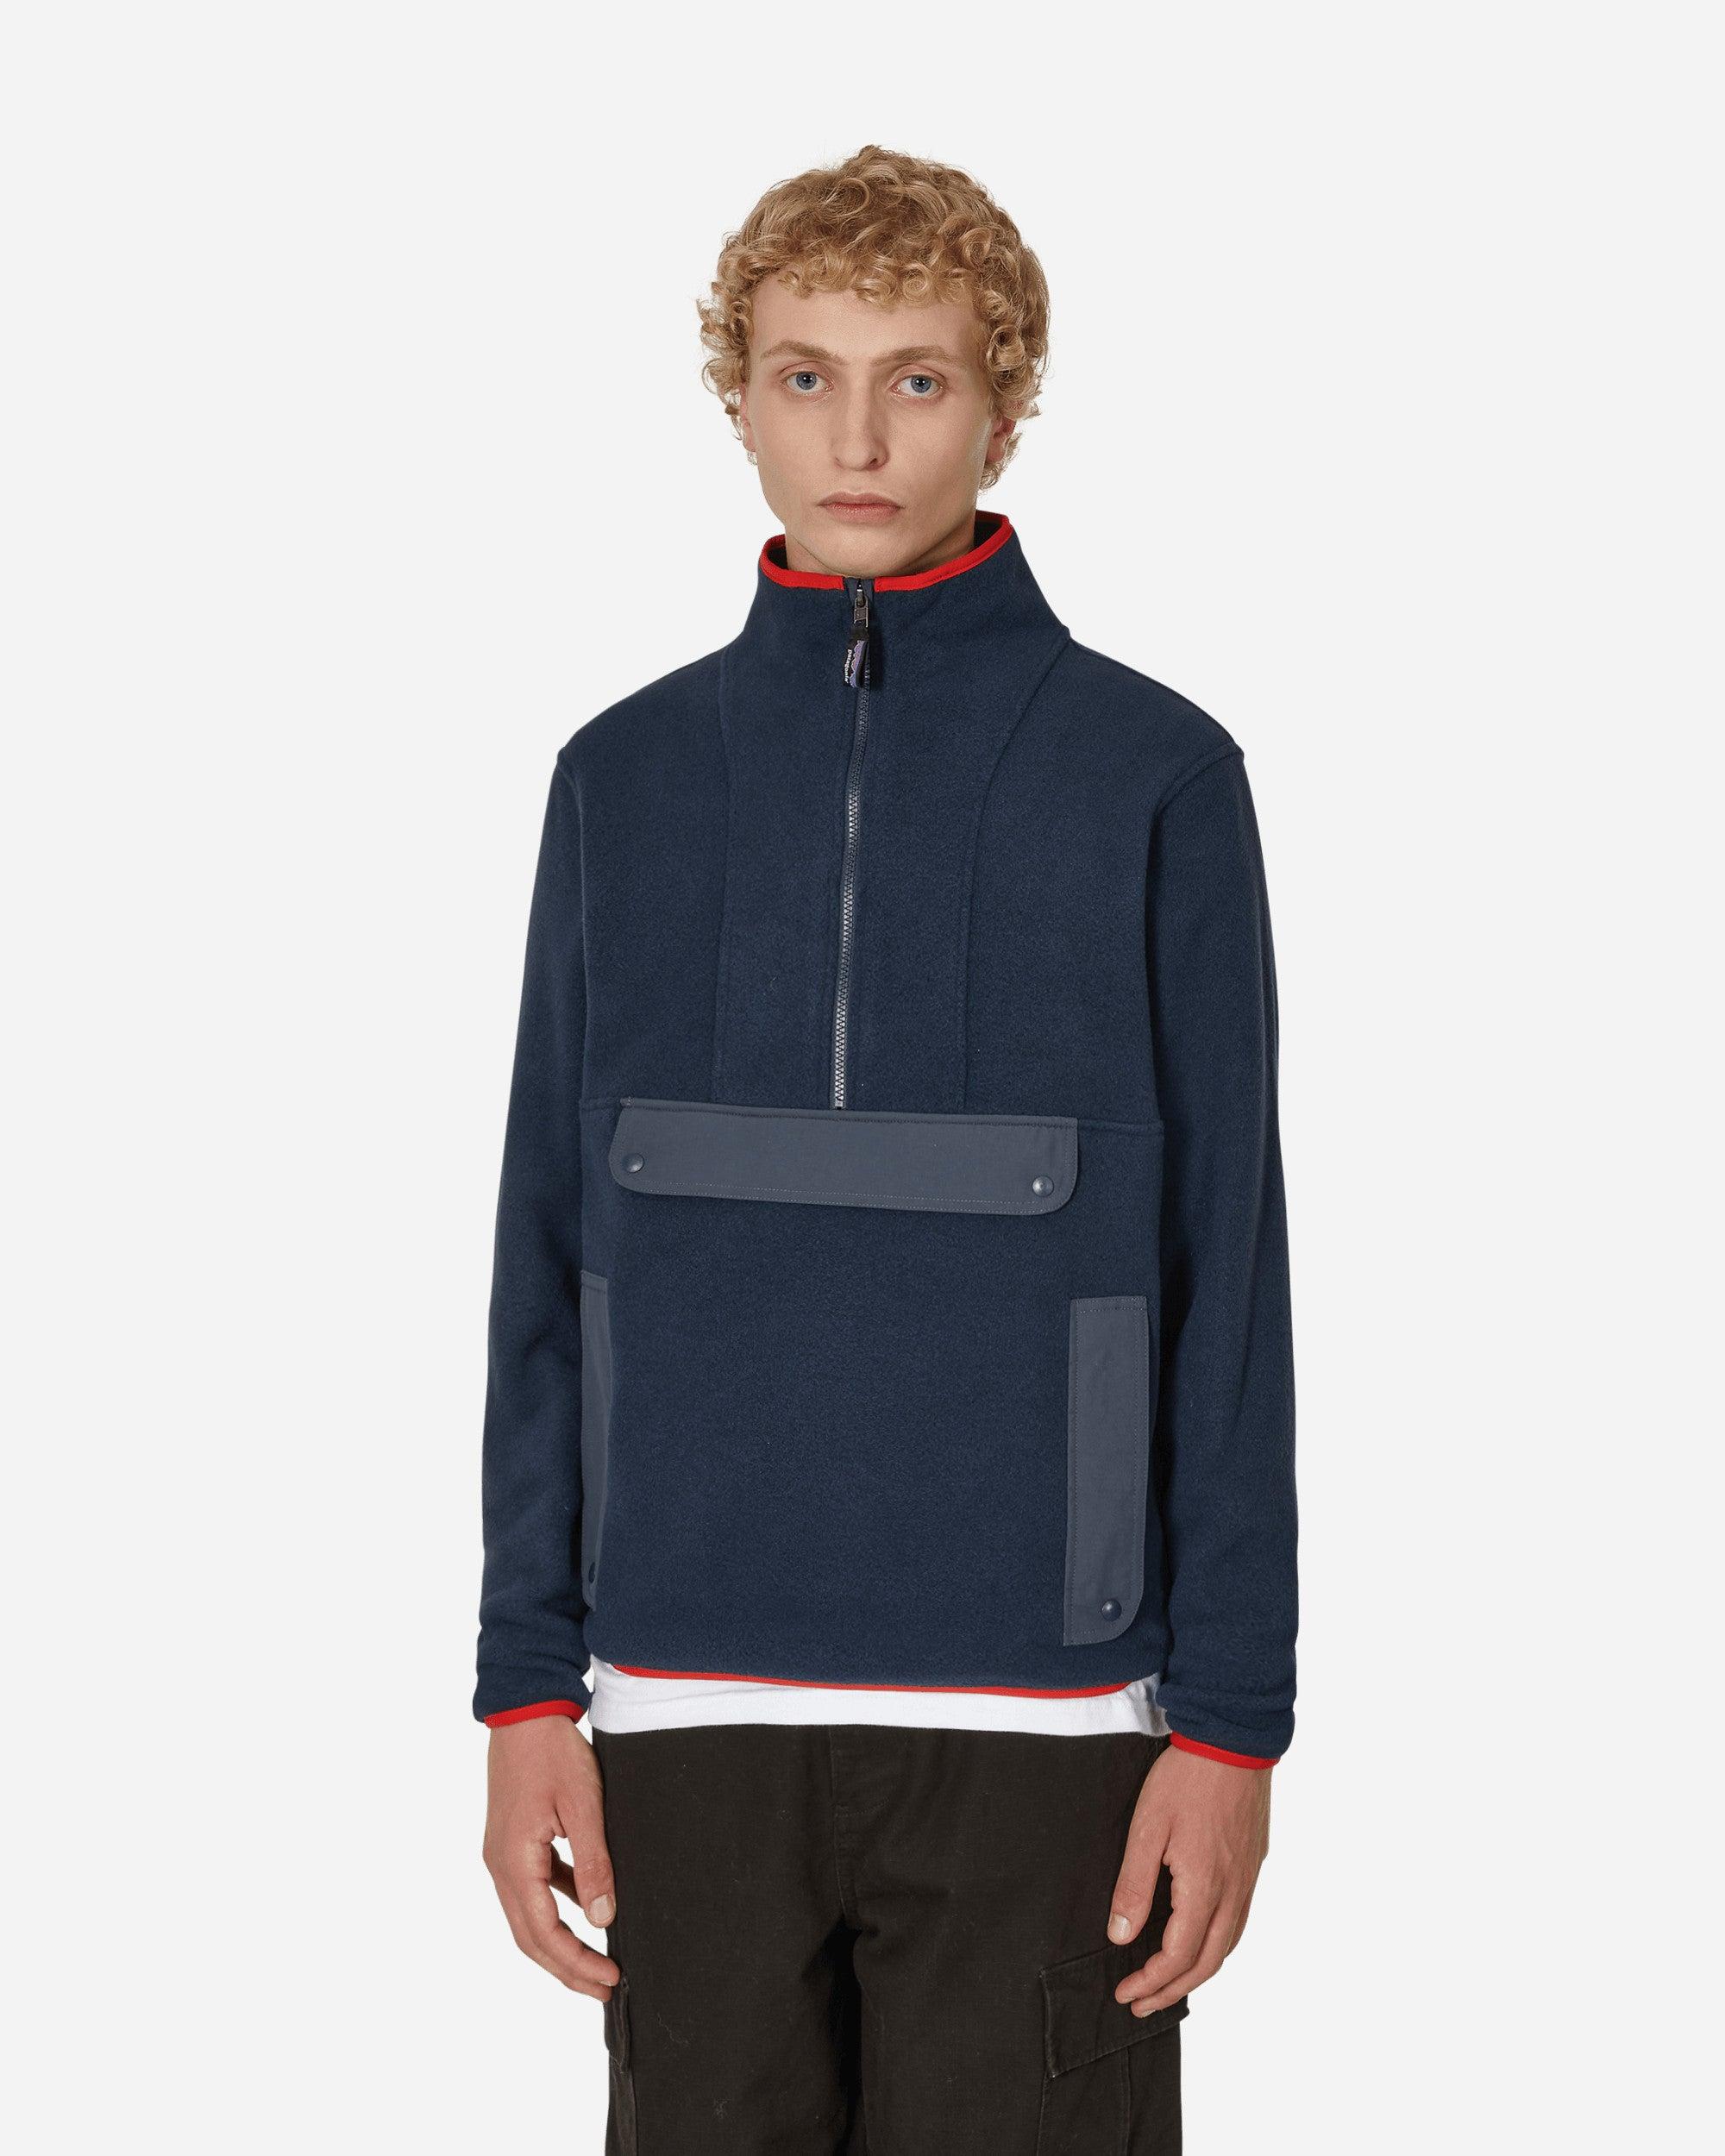 Patagonia Synchilla Fleece - 40% off in Oatmeal Heather and Red